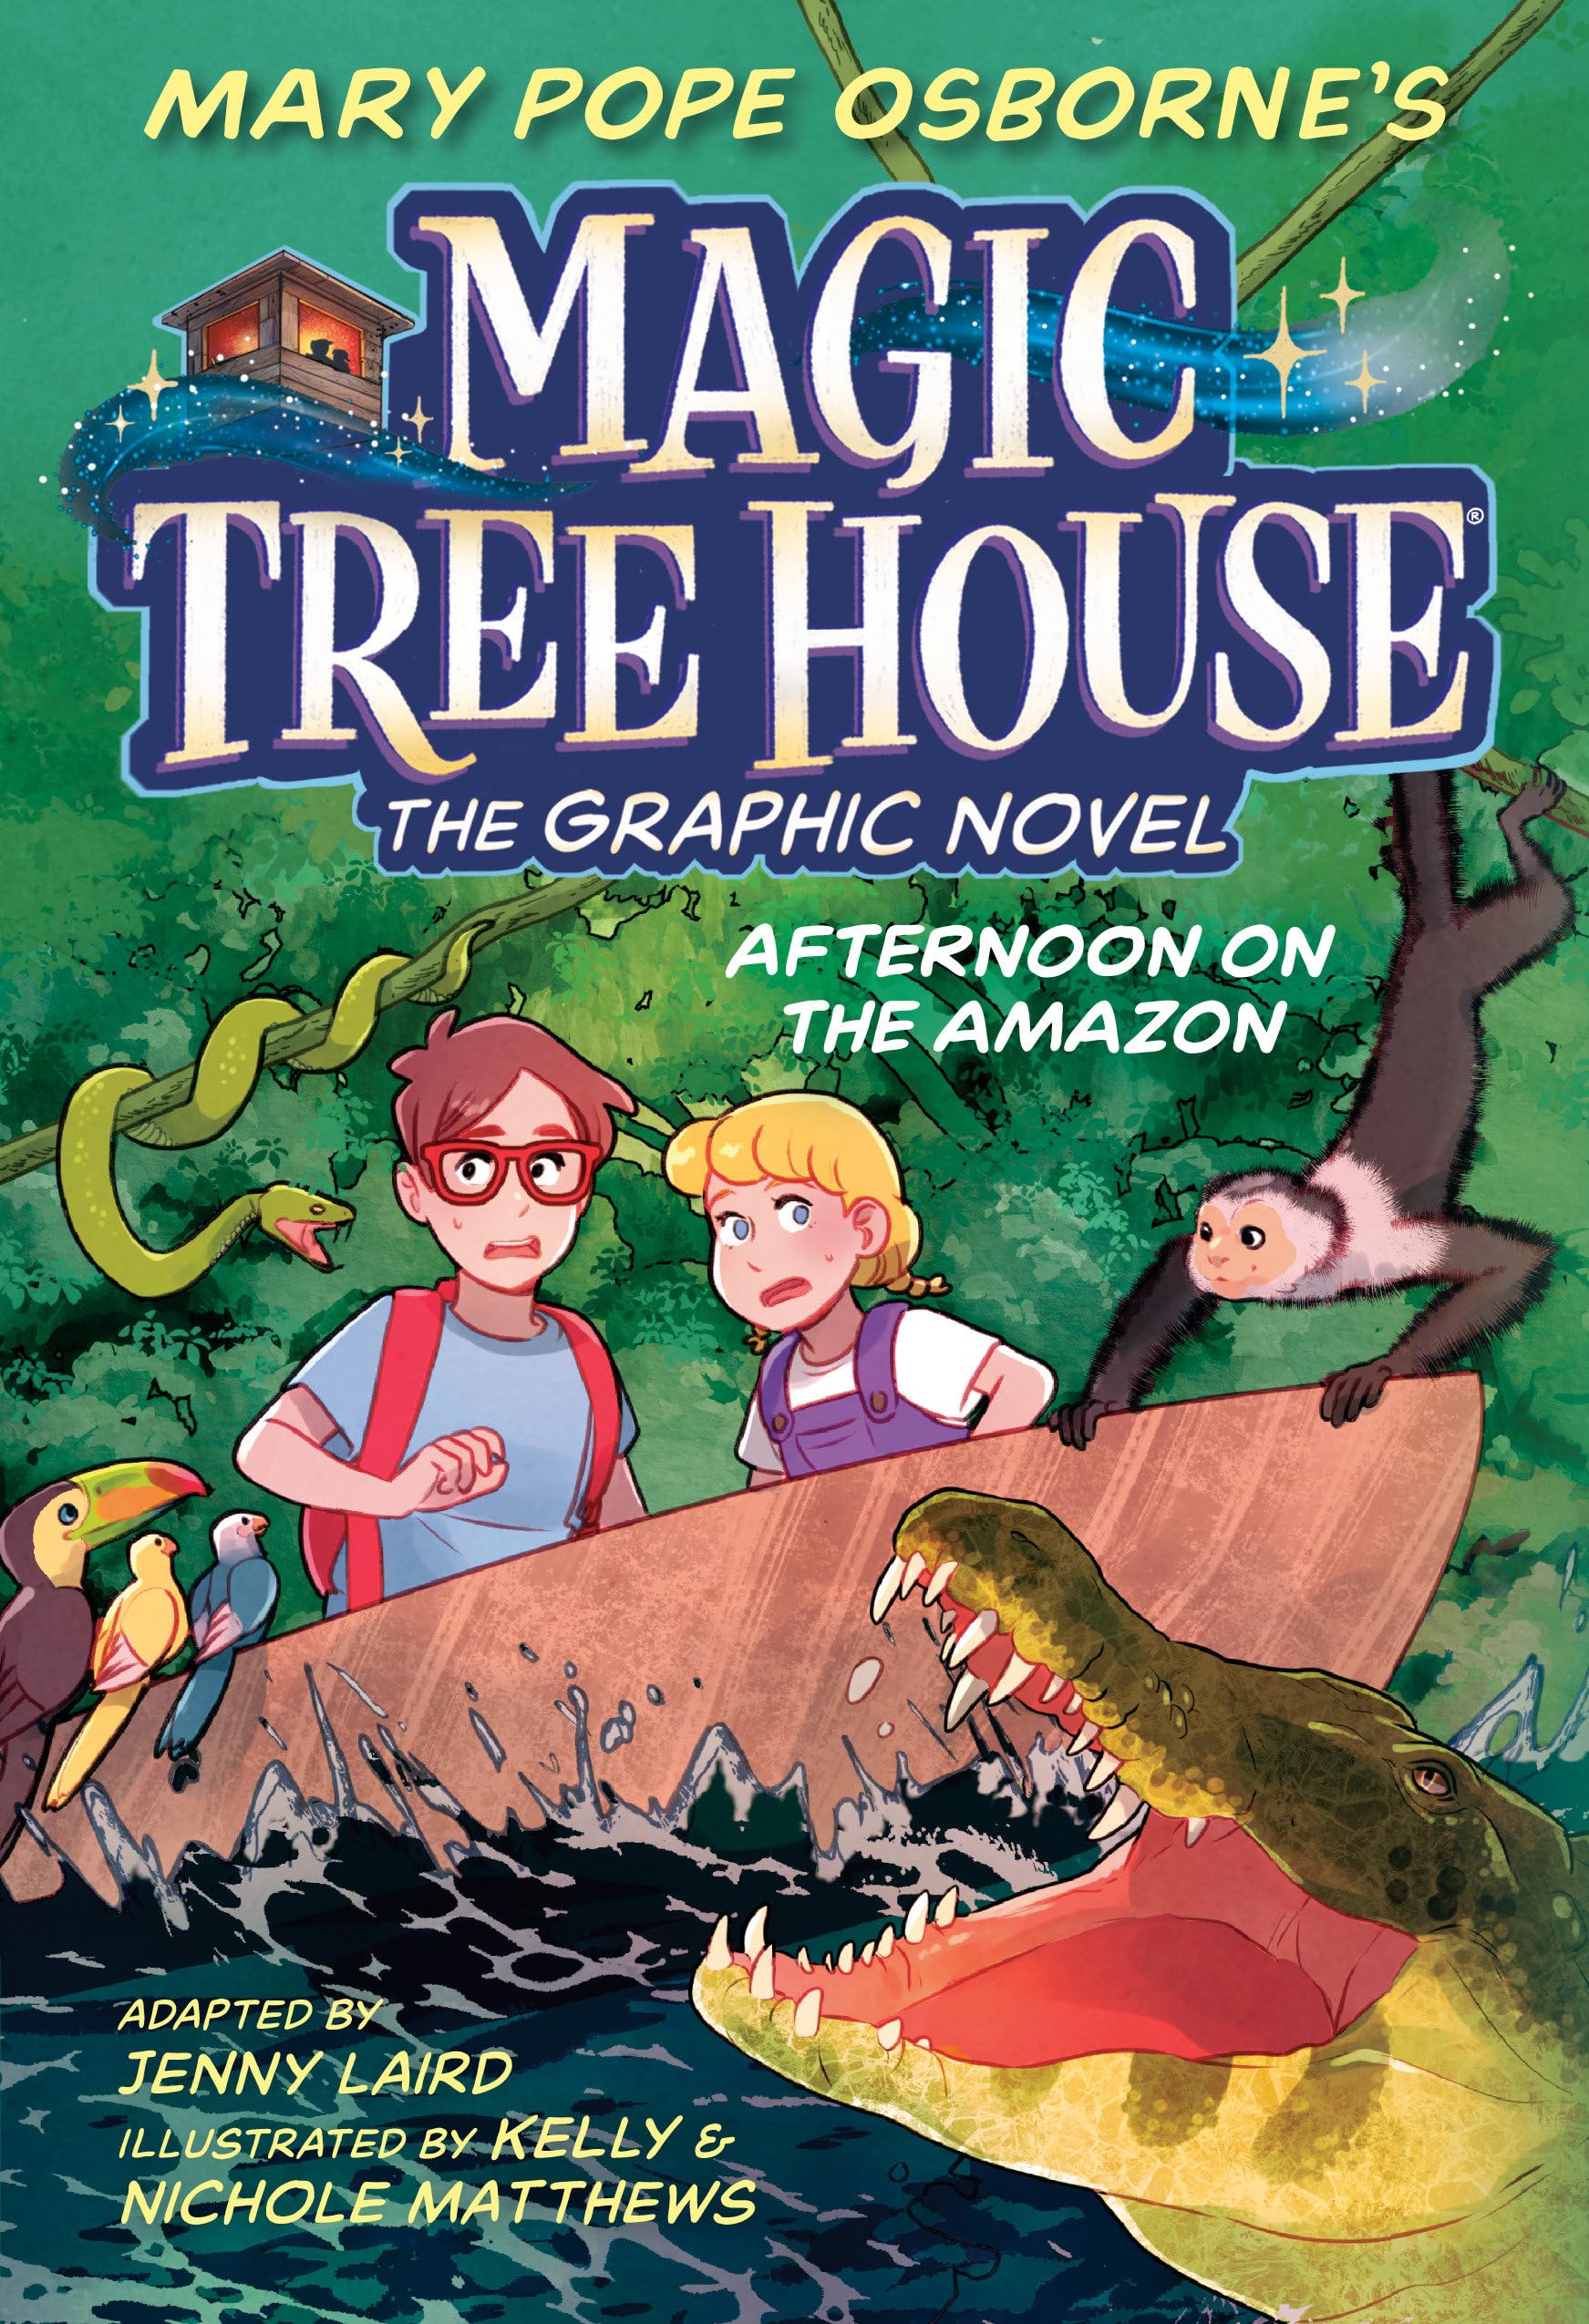 Afternoon on the Amazon Graphic Novel (Magic Tree House (R))